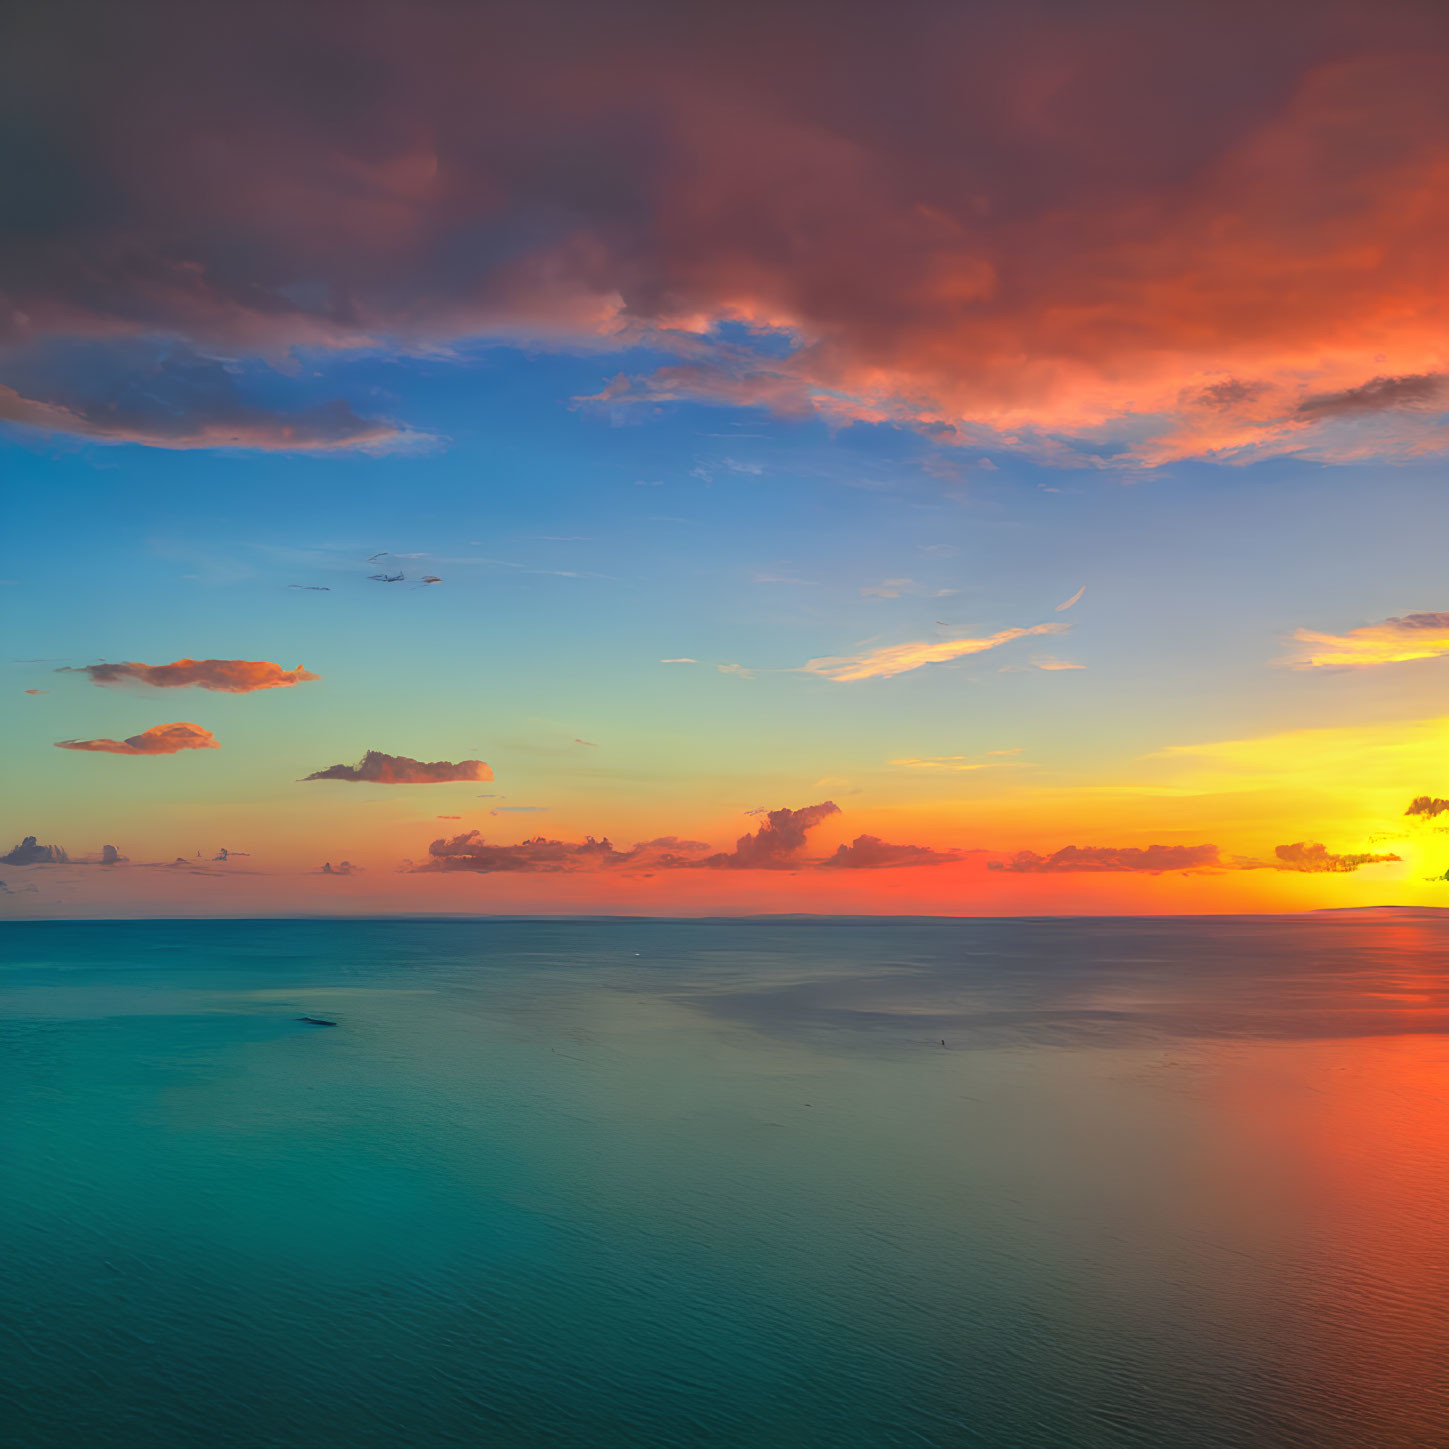 Scenic sunset over calm sea with warm hues and blue sky